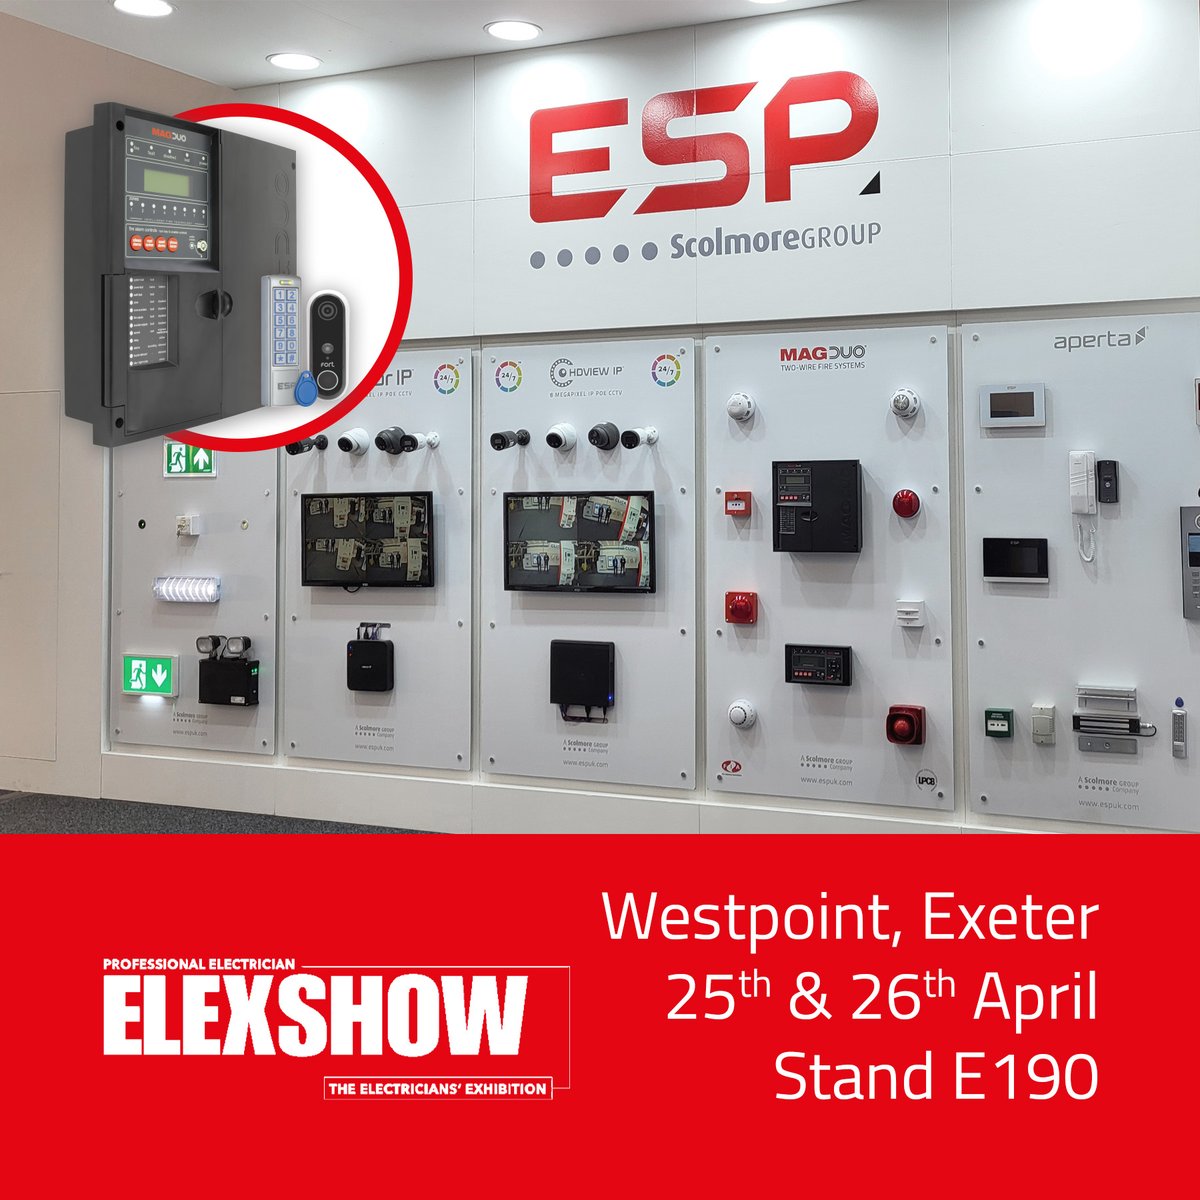 In just 2 weeks, we will be in Exeter for @Elexshow! 📅 Come by Stand E190 to talk about fire safety, CCTV and access control 🔥 Register for your FREE entry 🔗 registration.hamerville.events/exf/3esguxeysl… Will we see you there? #Elex #ElexShow #ElexExeter #ESP